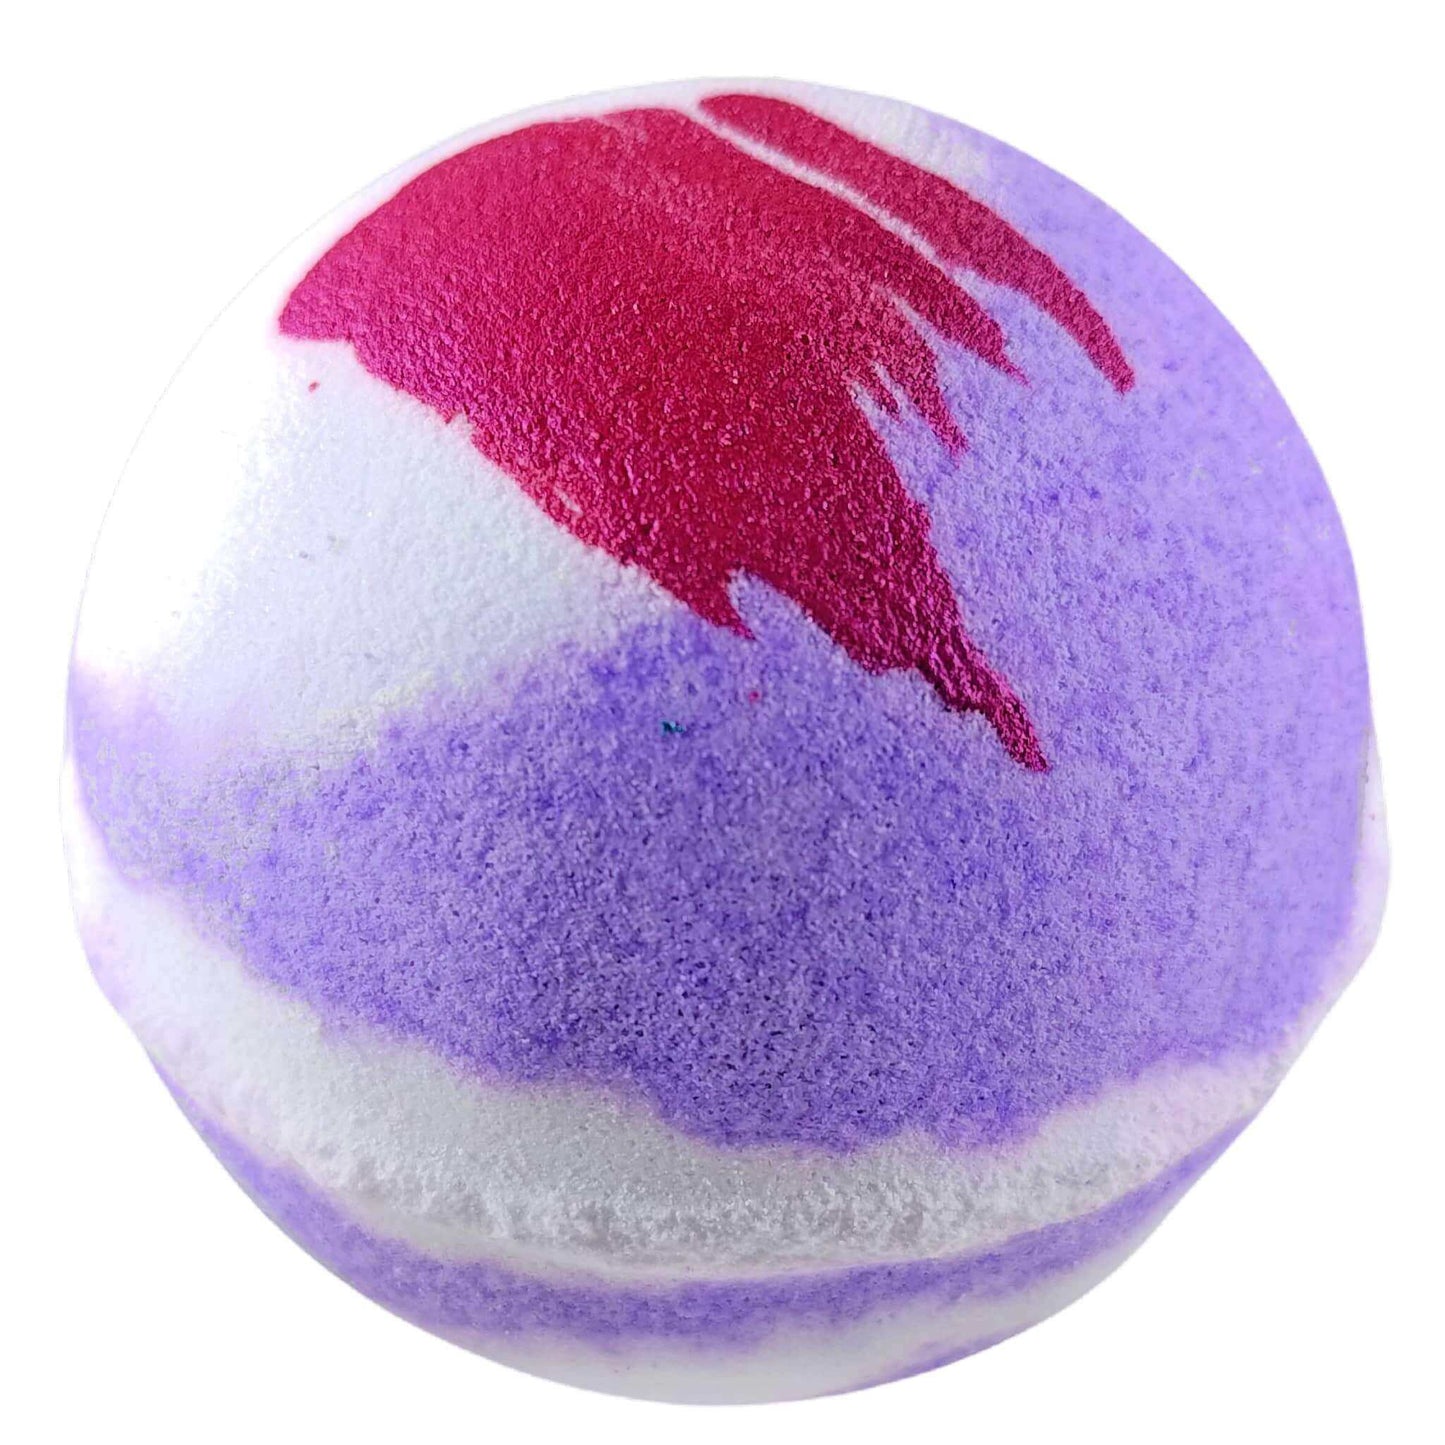 Transform your bathtub into a luxury spa with our Lavender Fizzy Bath Bomb. Relax and unwind.